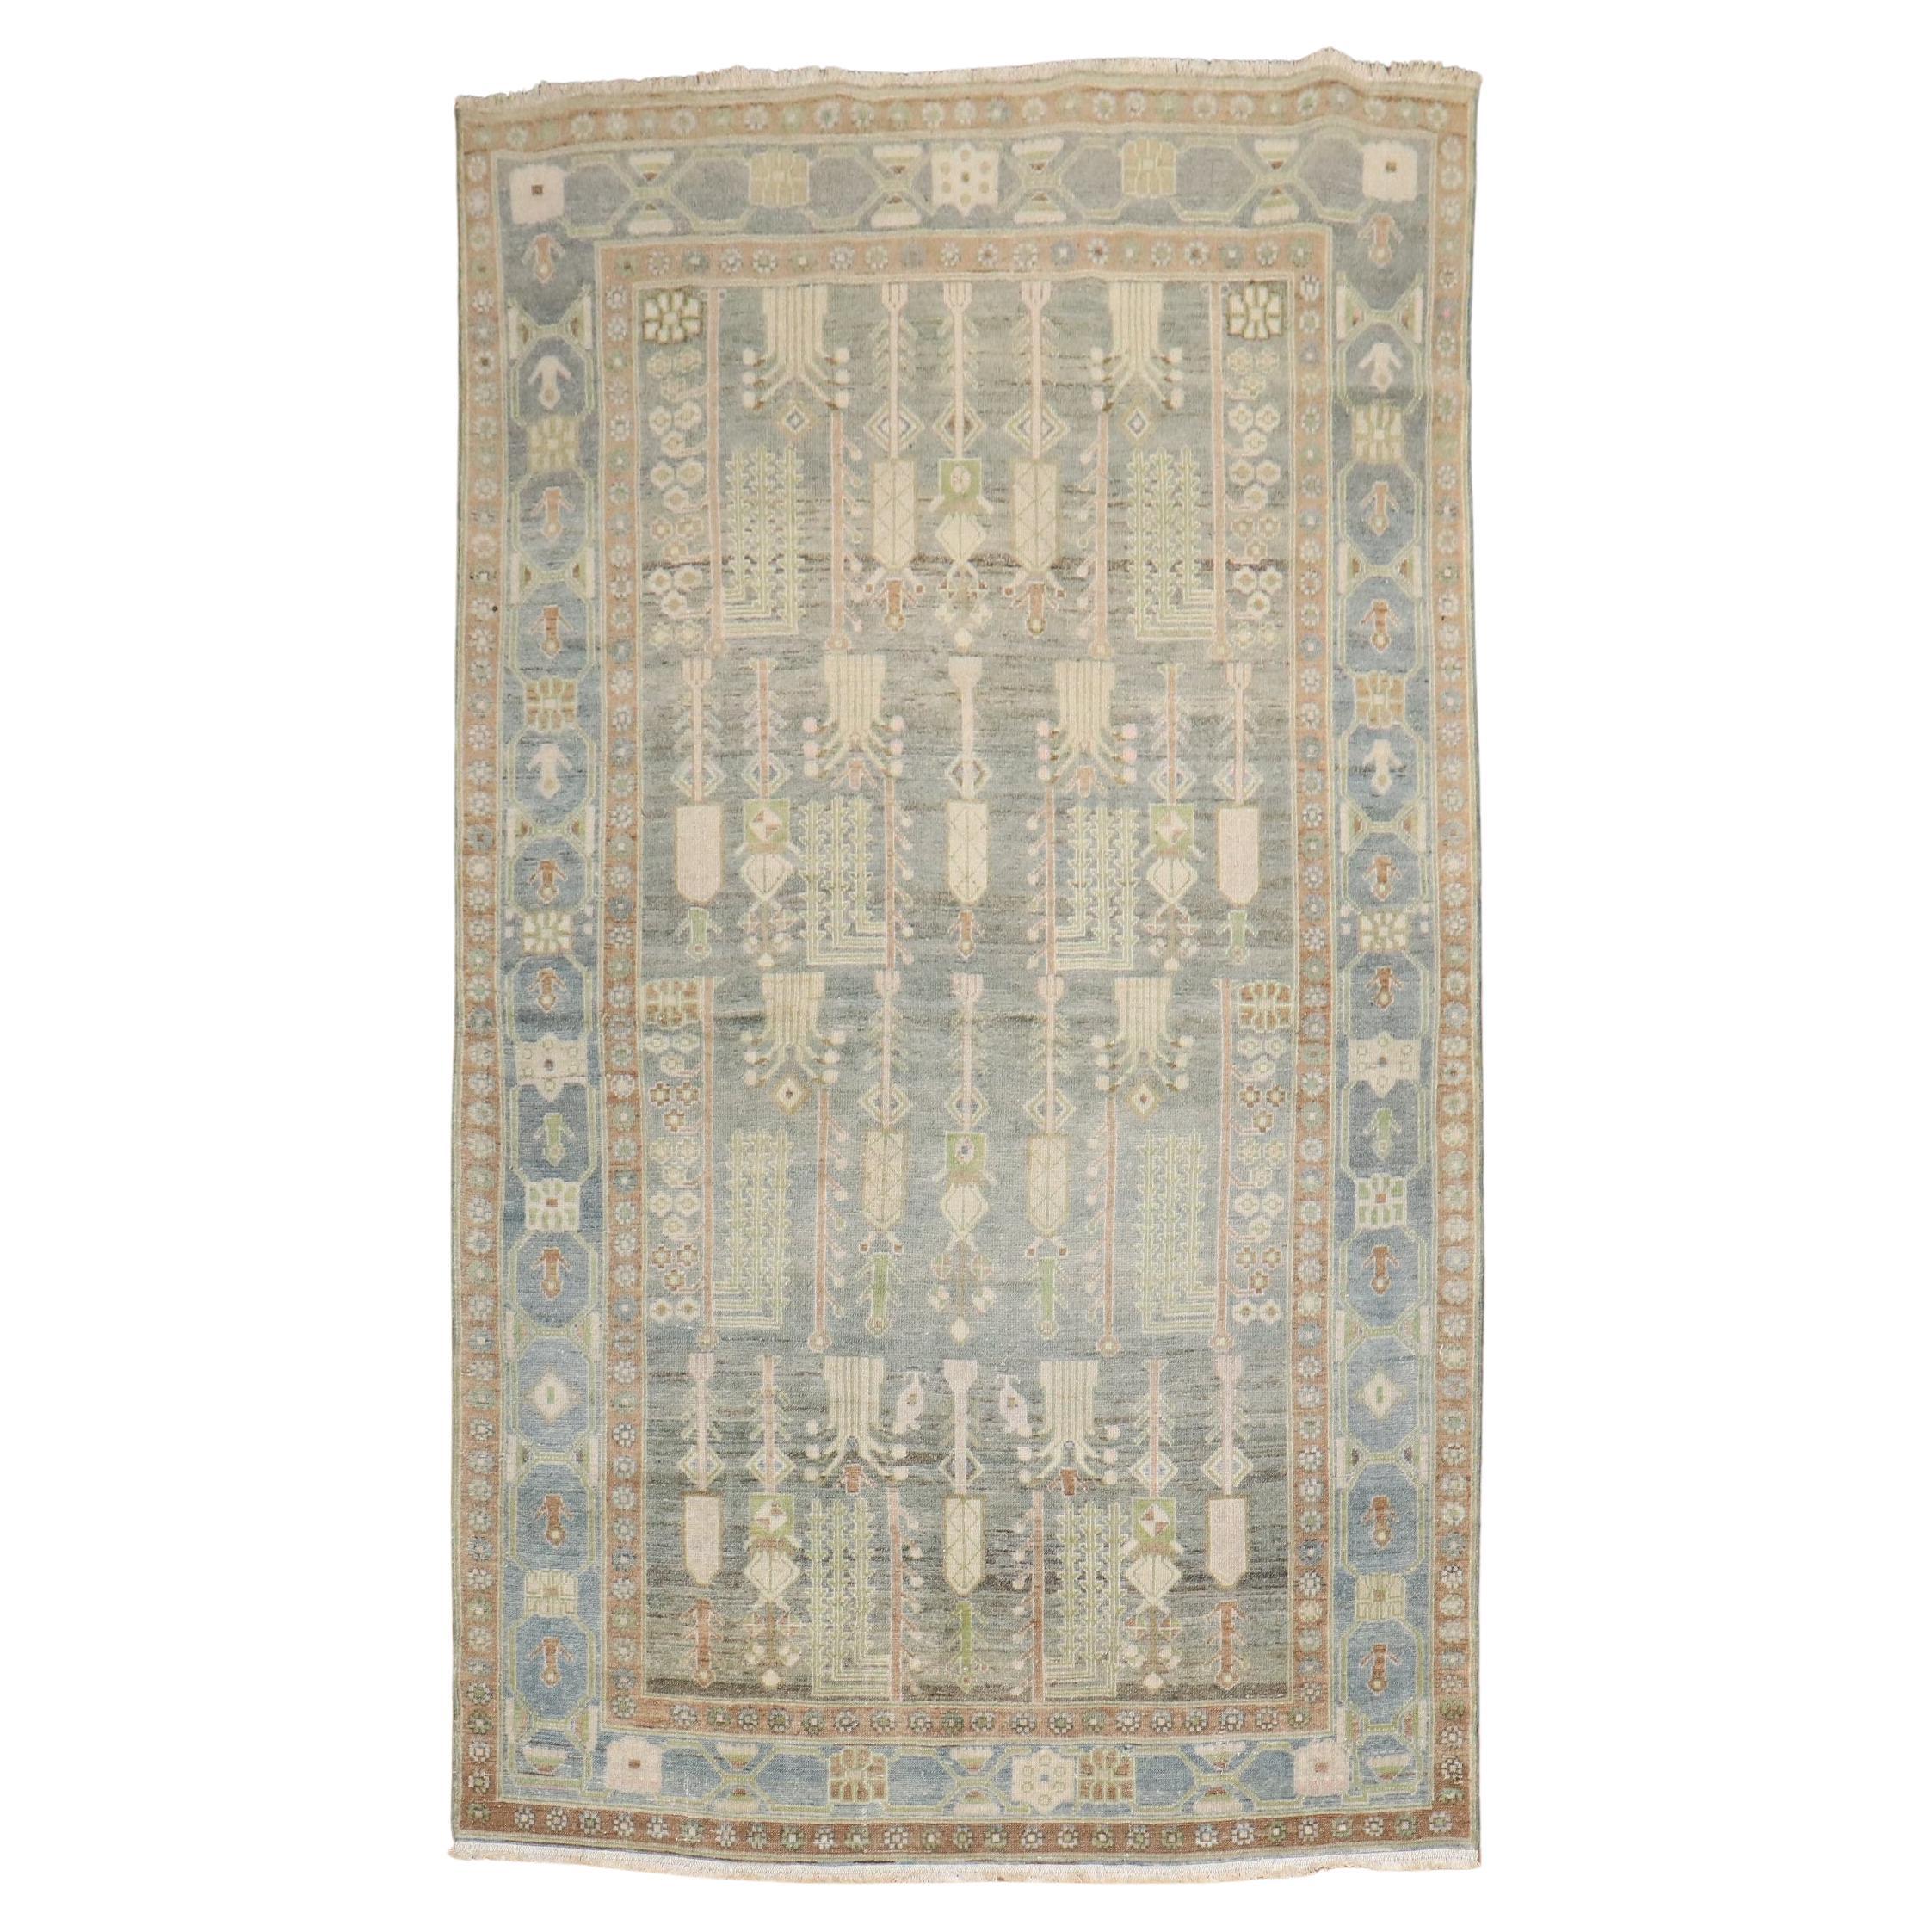 Zabihi Collection Weeping Willow Tree Antique Persian Malayer Rug